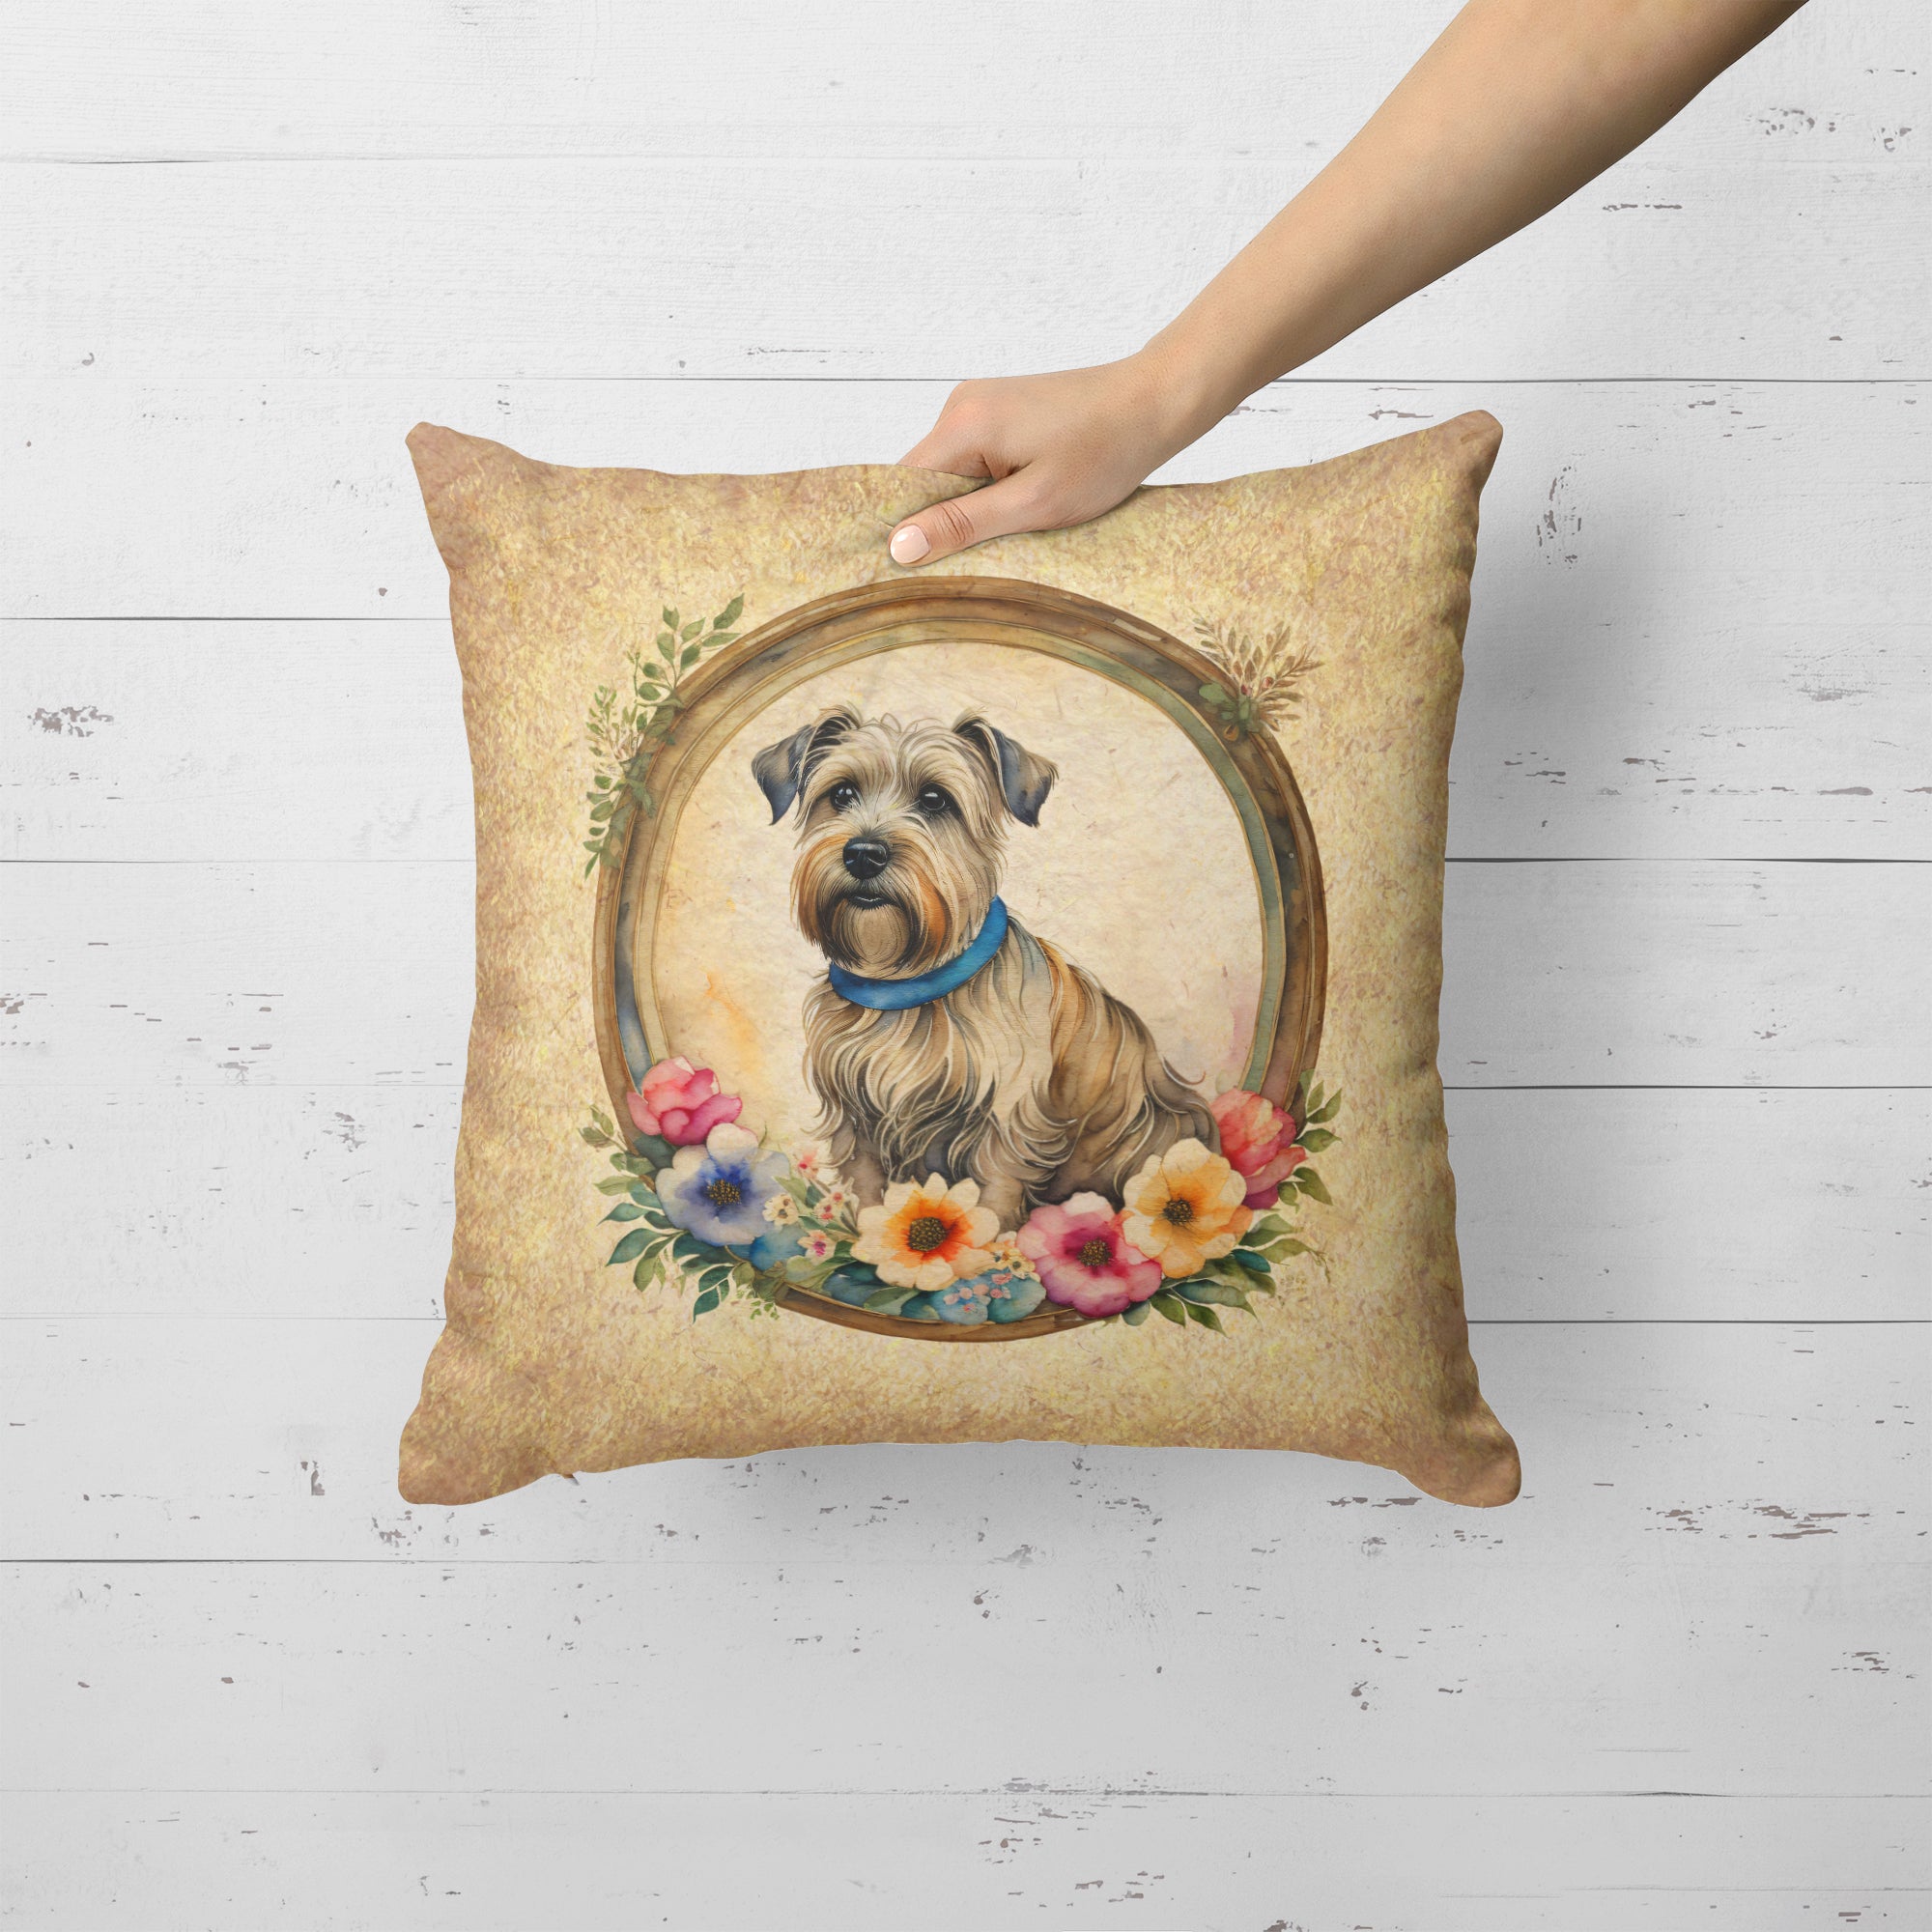 Buy this Glen of Imaal Terrier and Flowers Fabric Decorative Pillow